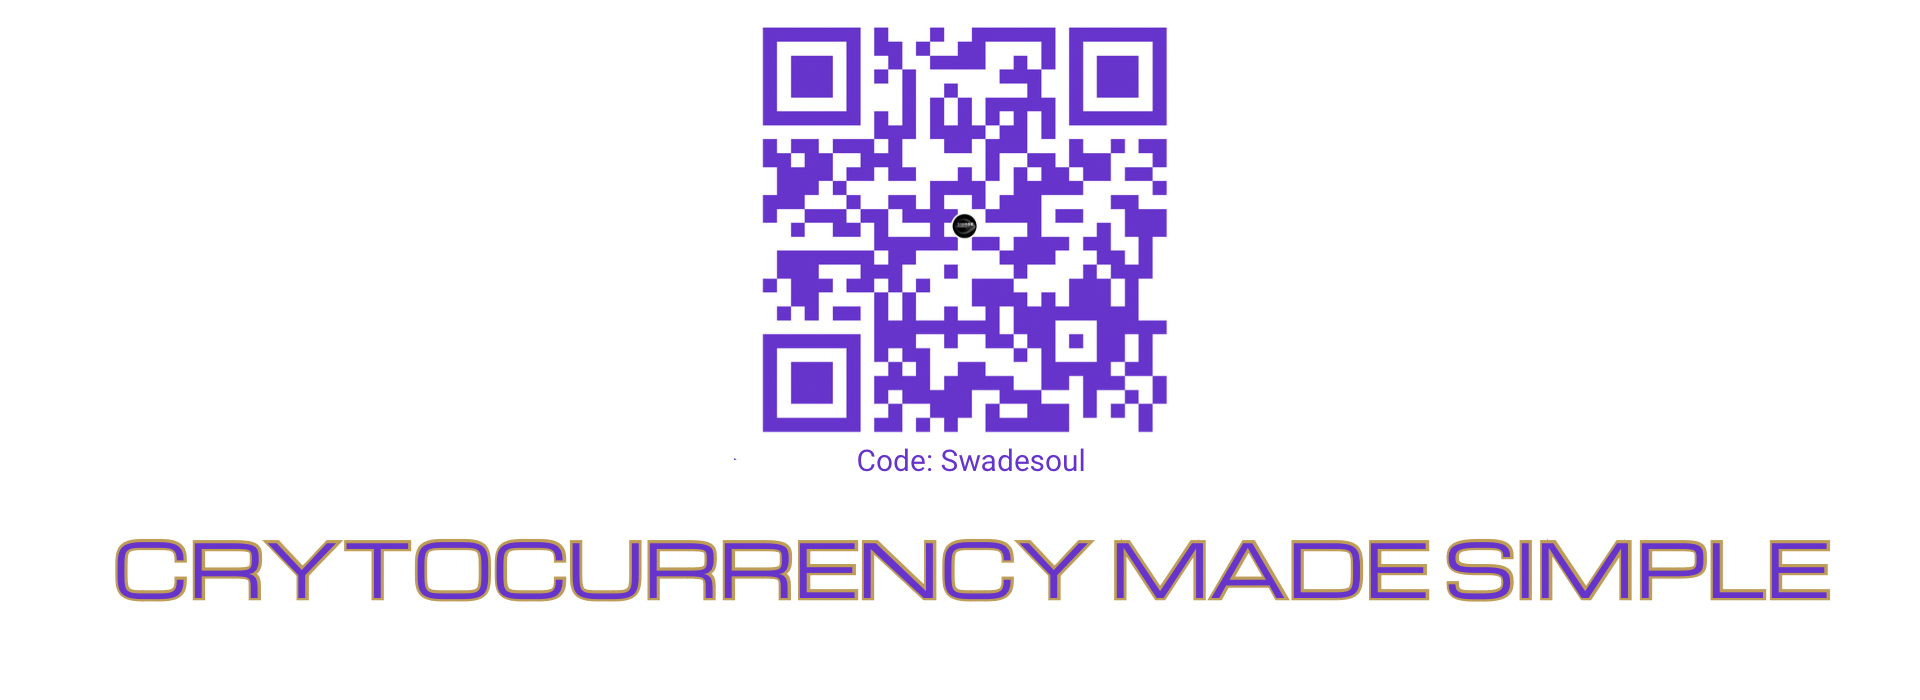 a qr code on a white background that says cryptocurrency made simple